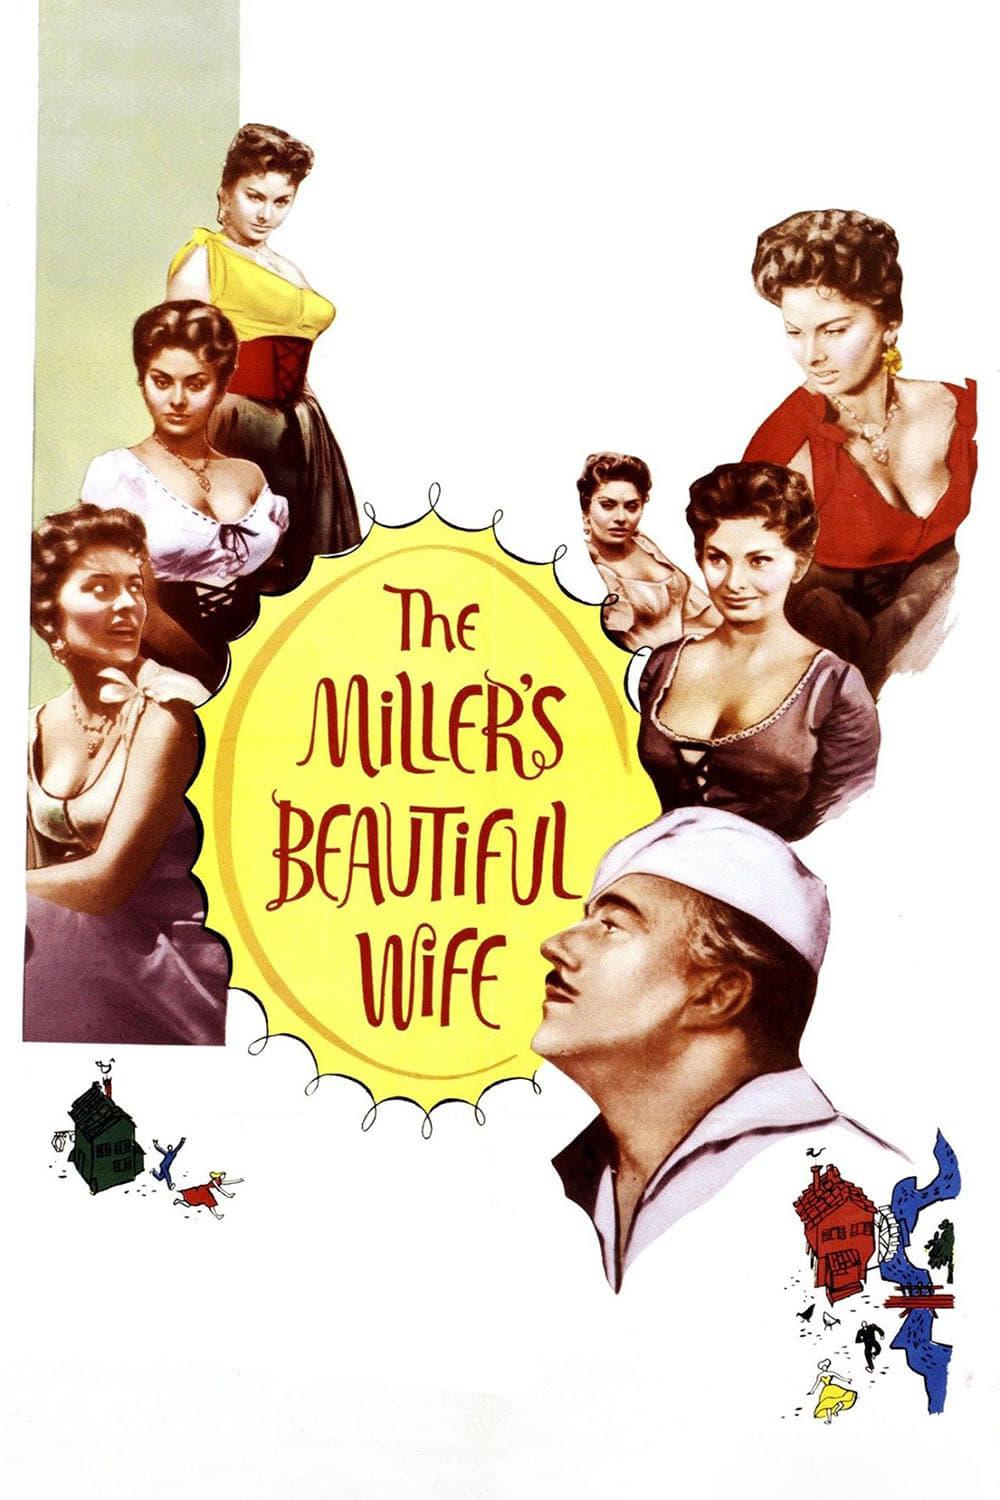 The Miller's Beautiful Wife poster